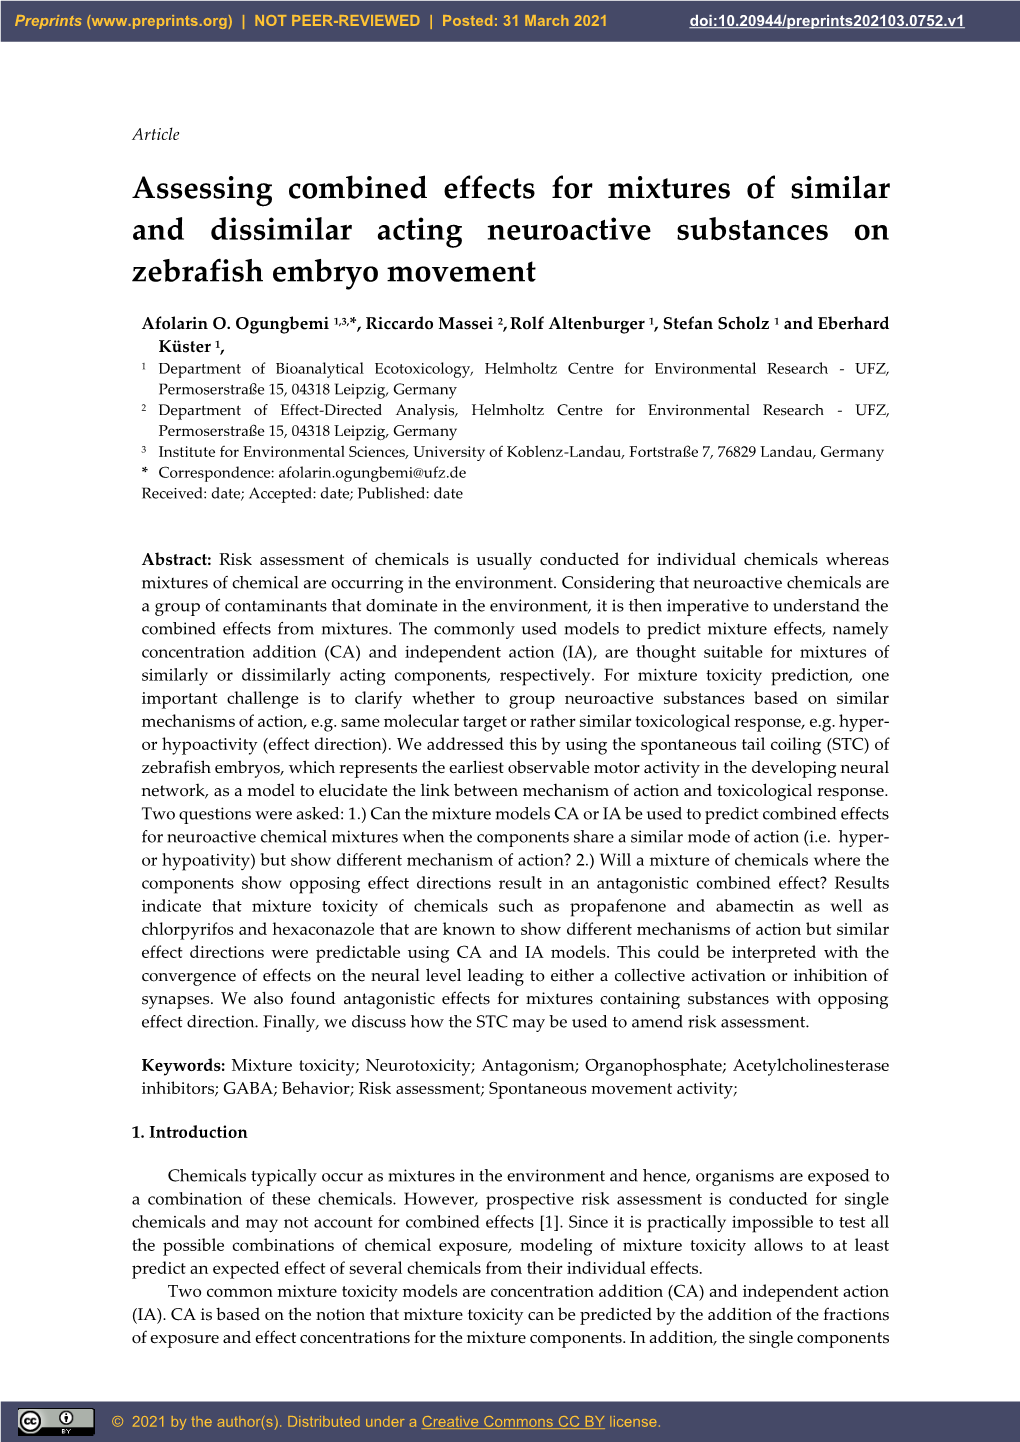 Assessing Combined Effects for Mixtures of Similar and Dissimilar Acting Neuroactive Substances on Zebrafish Embryo Movement